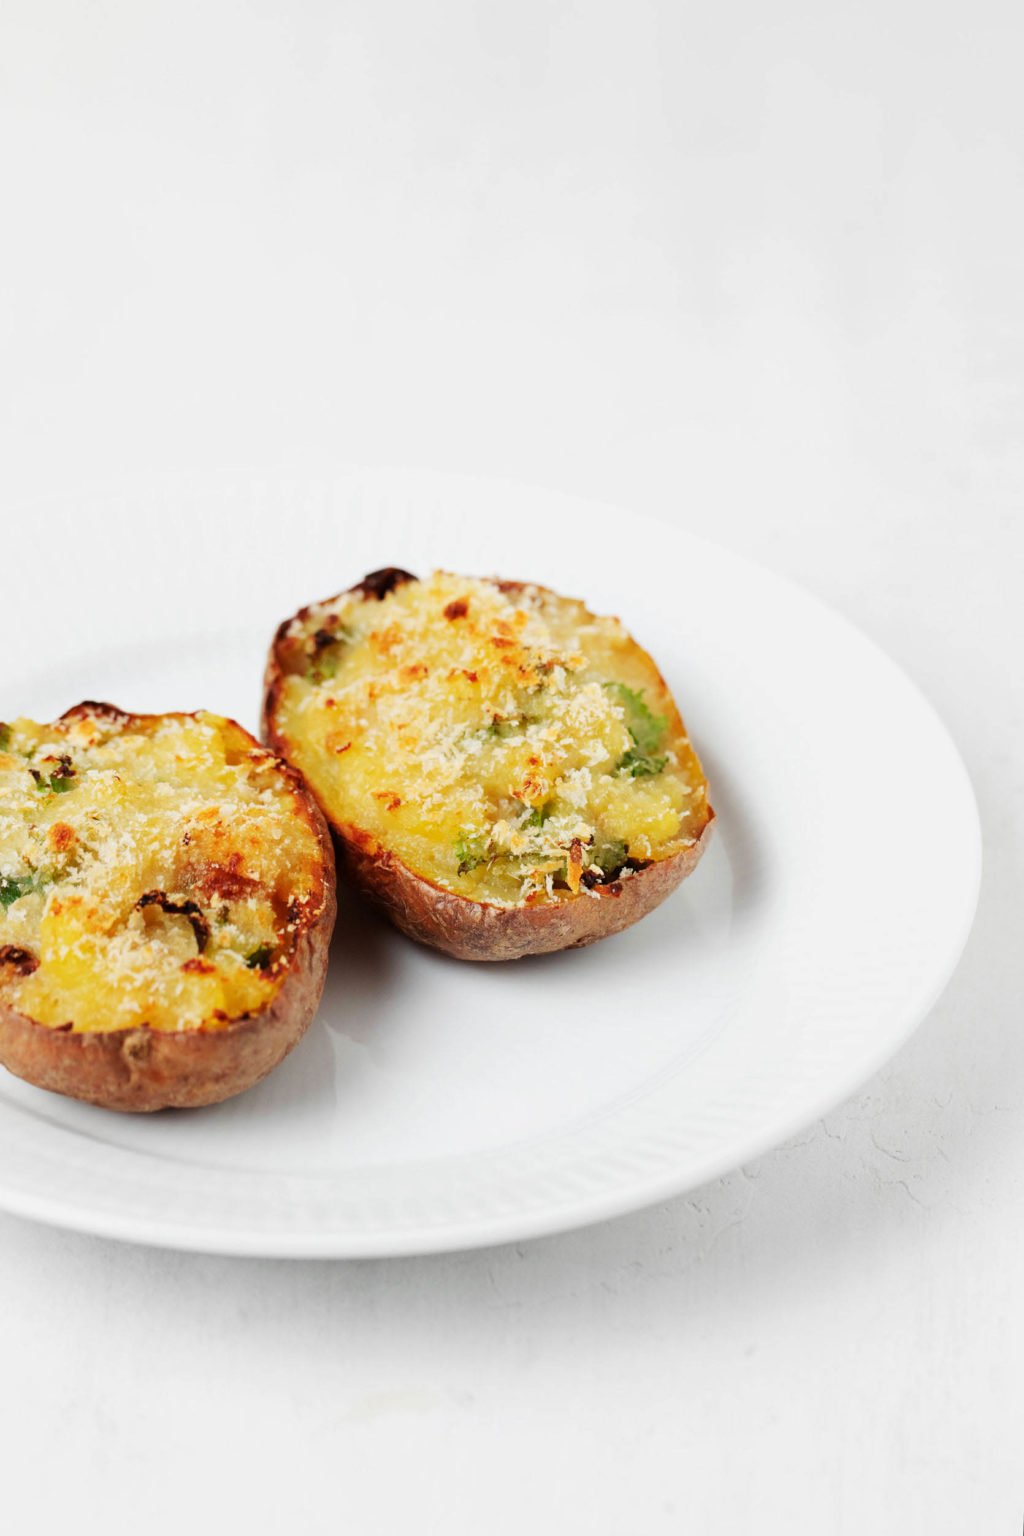 Two loaded, baked potatoes have been stuffed with kale and garlic. They rest on a round, white plate.